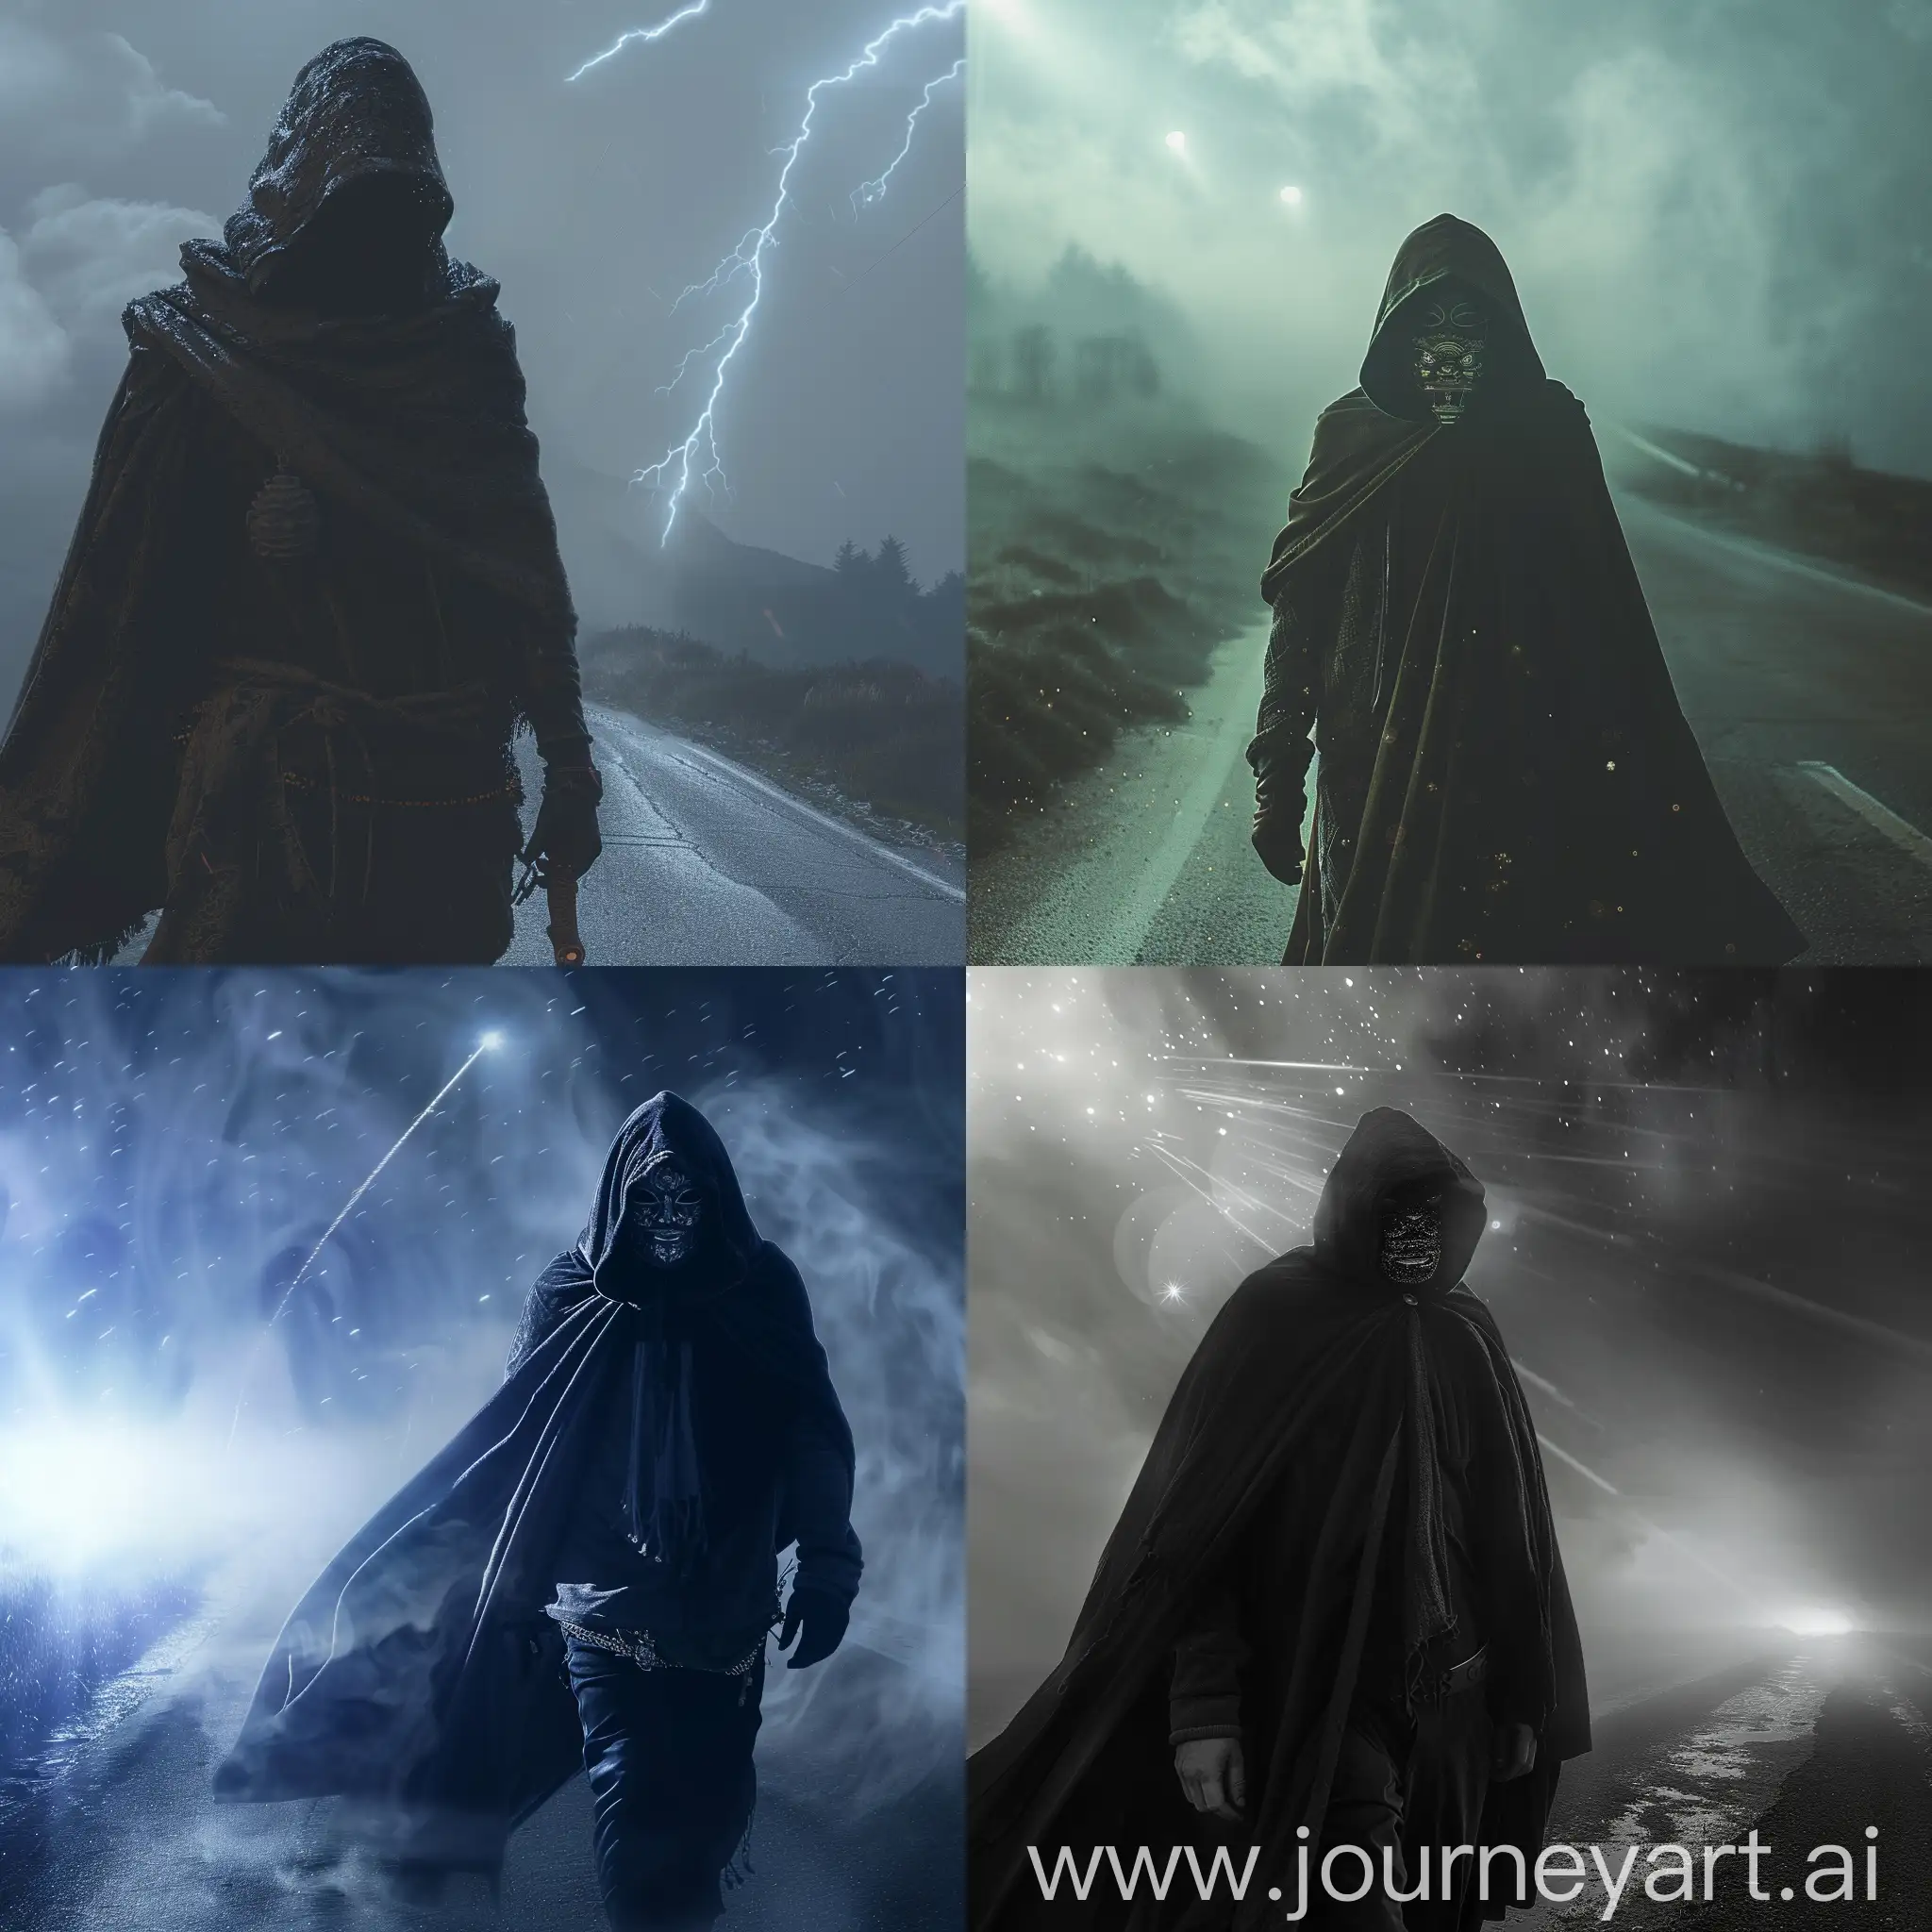 Mysterious-Figure-with-Oriental-Mask-Walking-Along-Foggy-Road-at-Night-with-Flashing-Sky